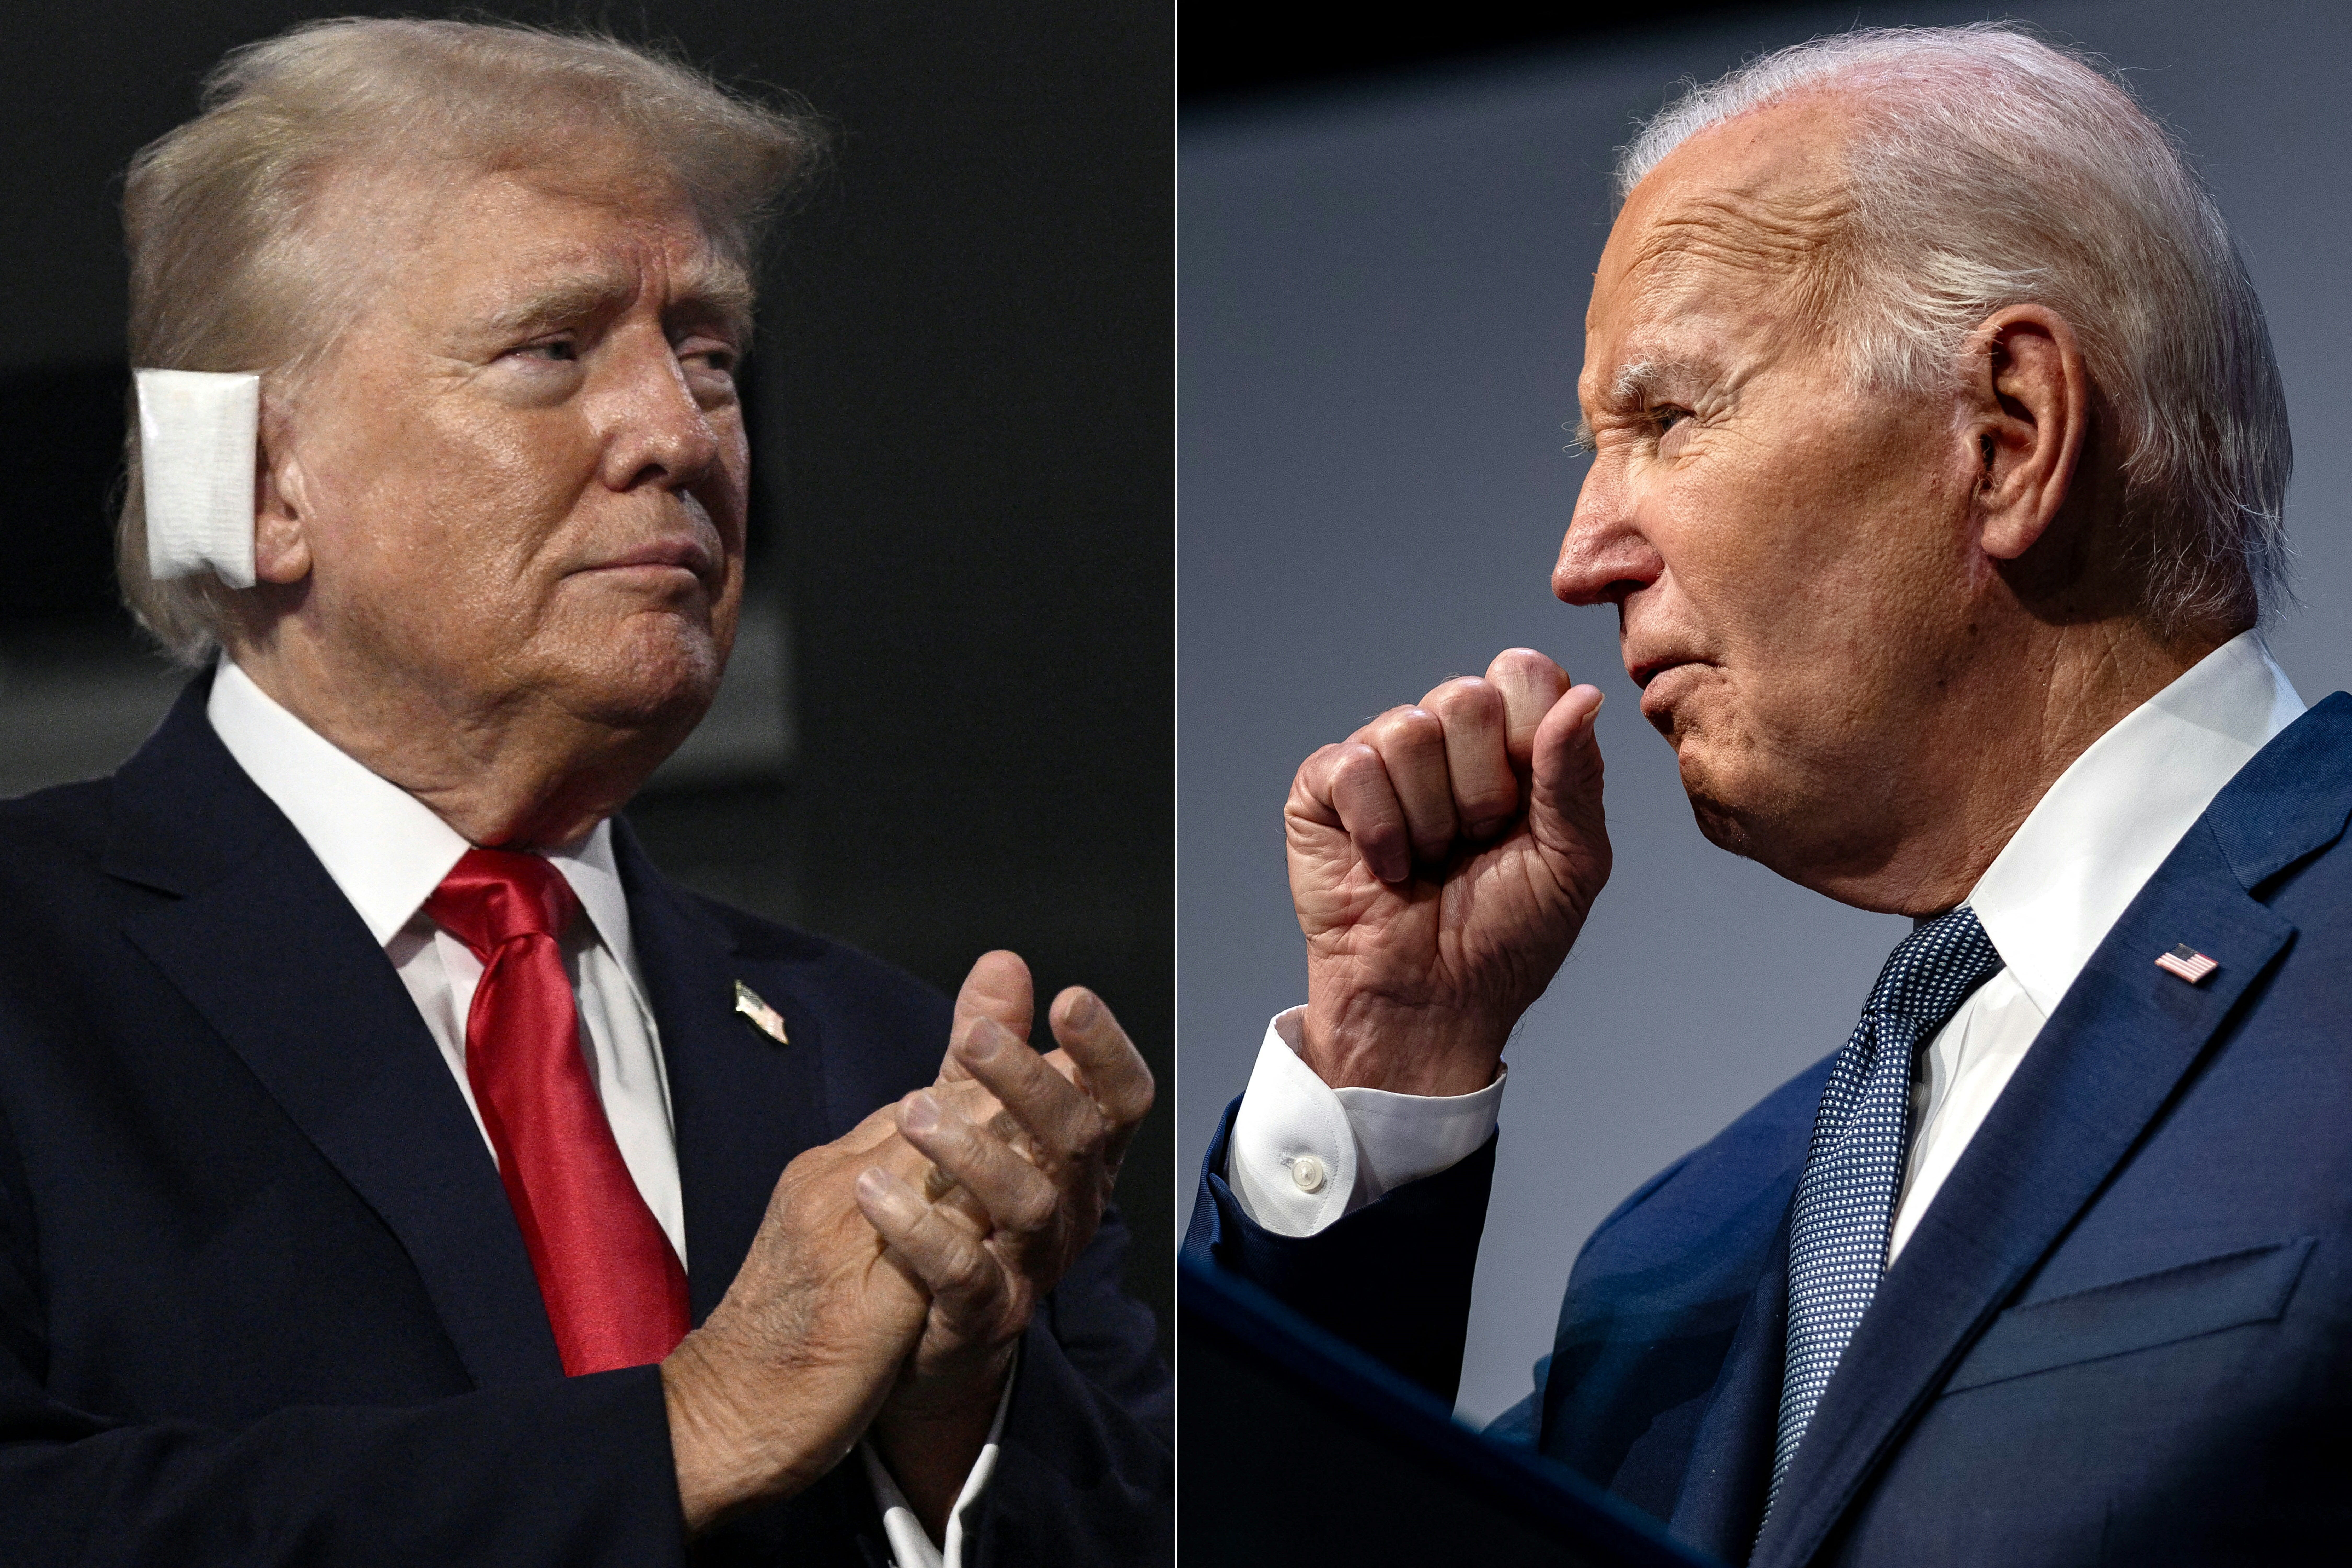 Brutal split screen: Biden holed up with COVID while Trump accepts nomination